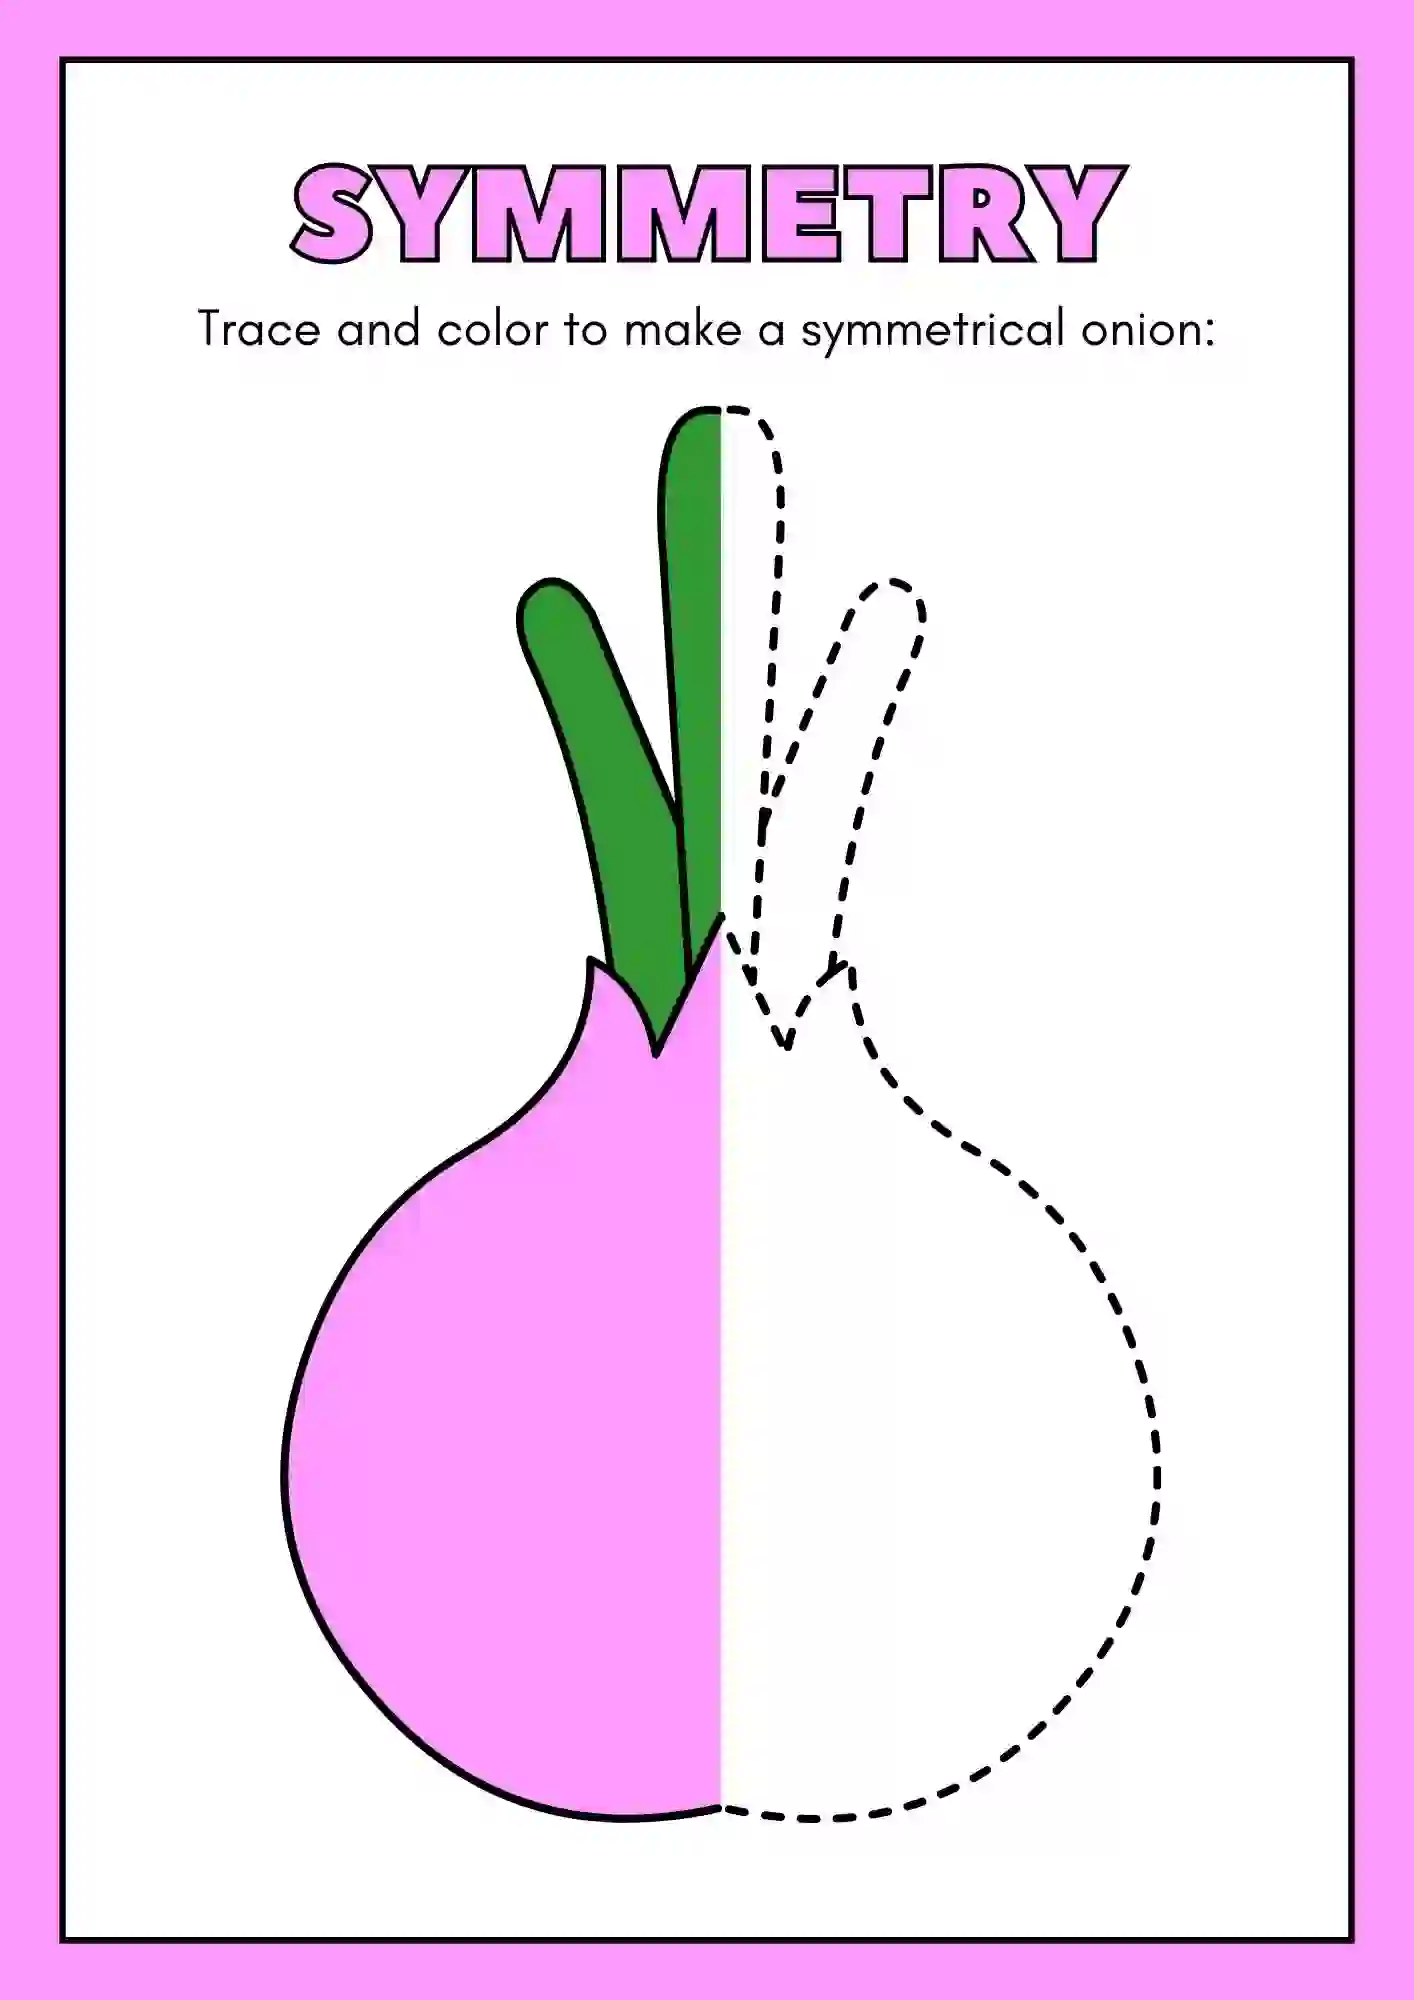 Symmetric Drawing and Coloring worksheets (onion)